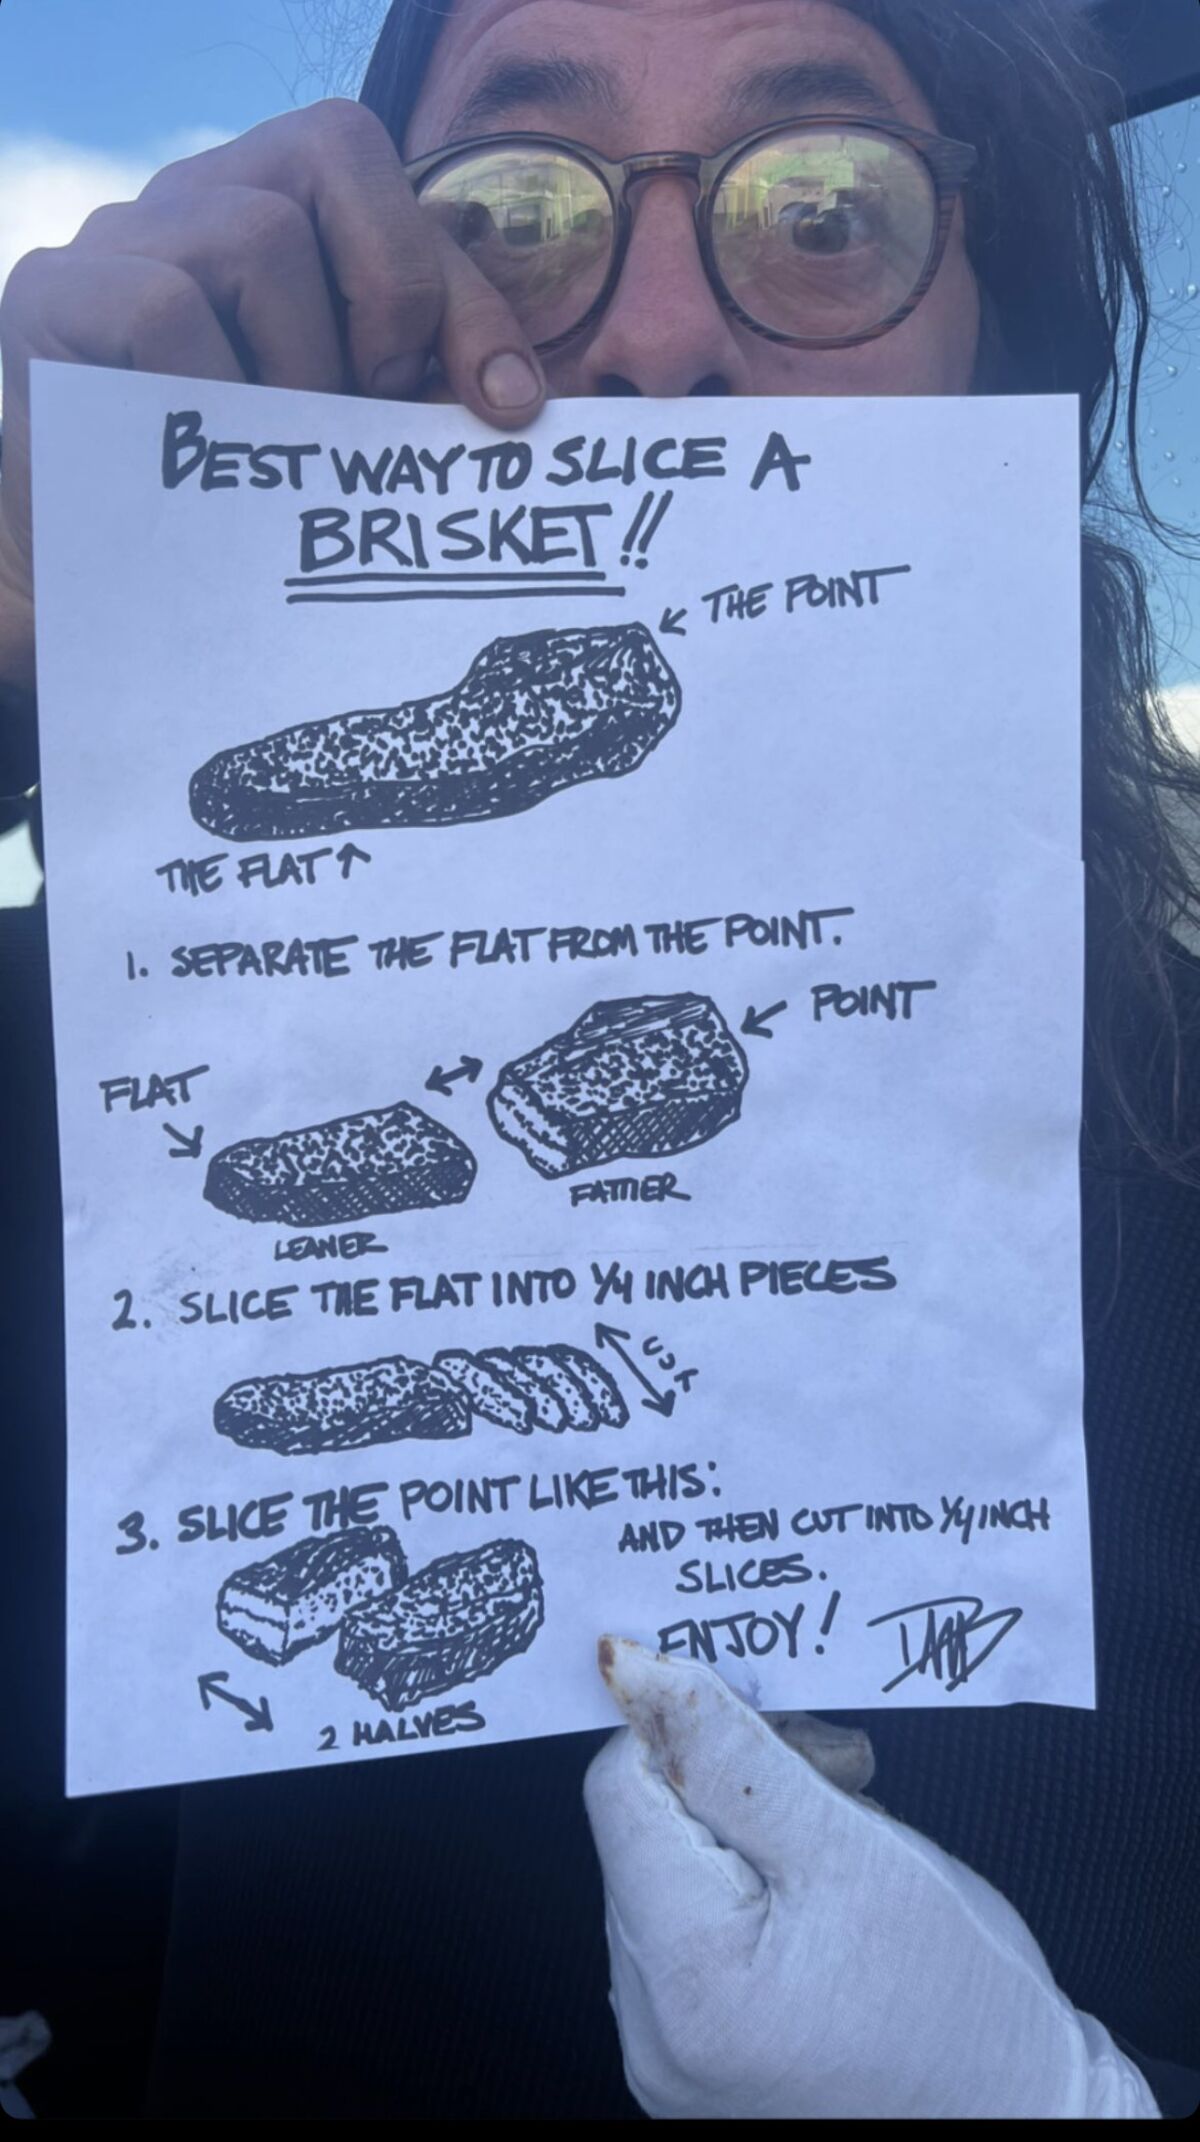 A man shows us his instructions for brisket. 